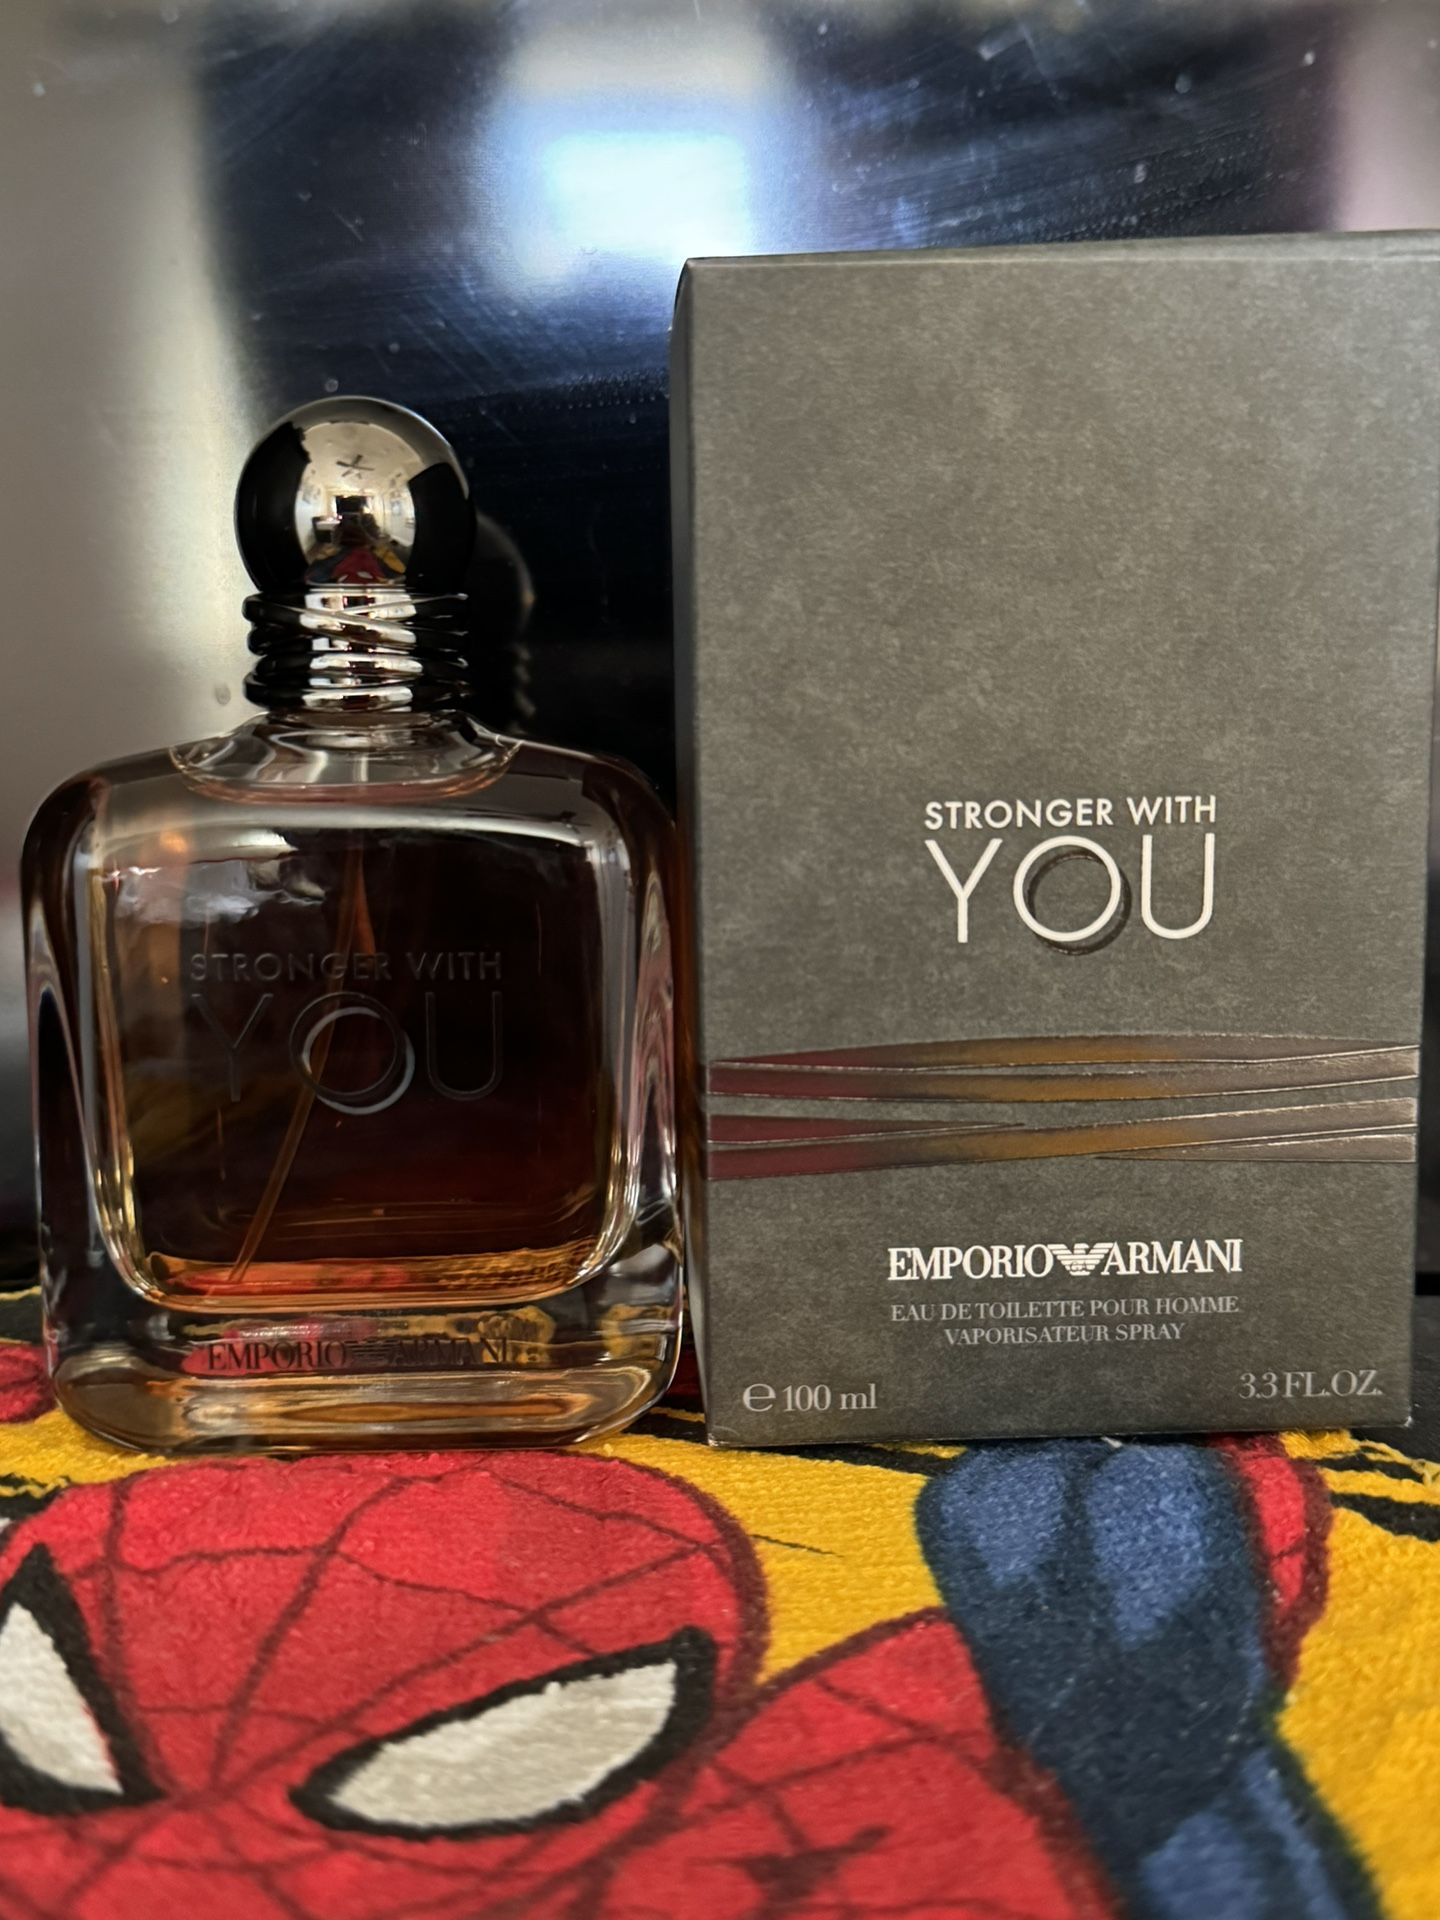 BRAND NEW Stronger with you EDT 3.4 fl oz